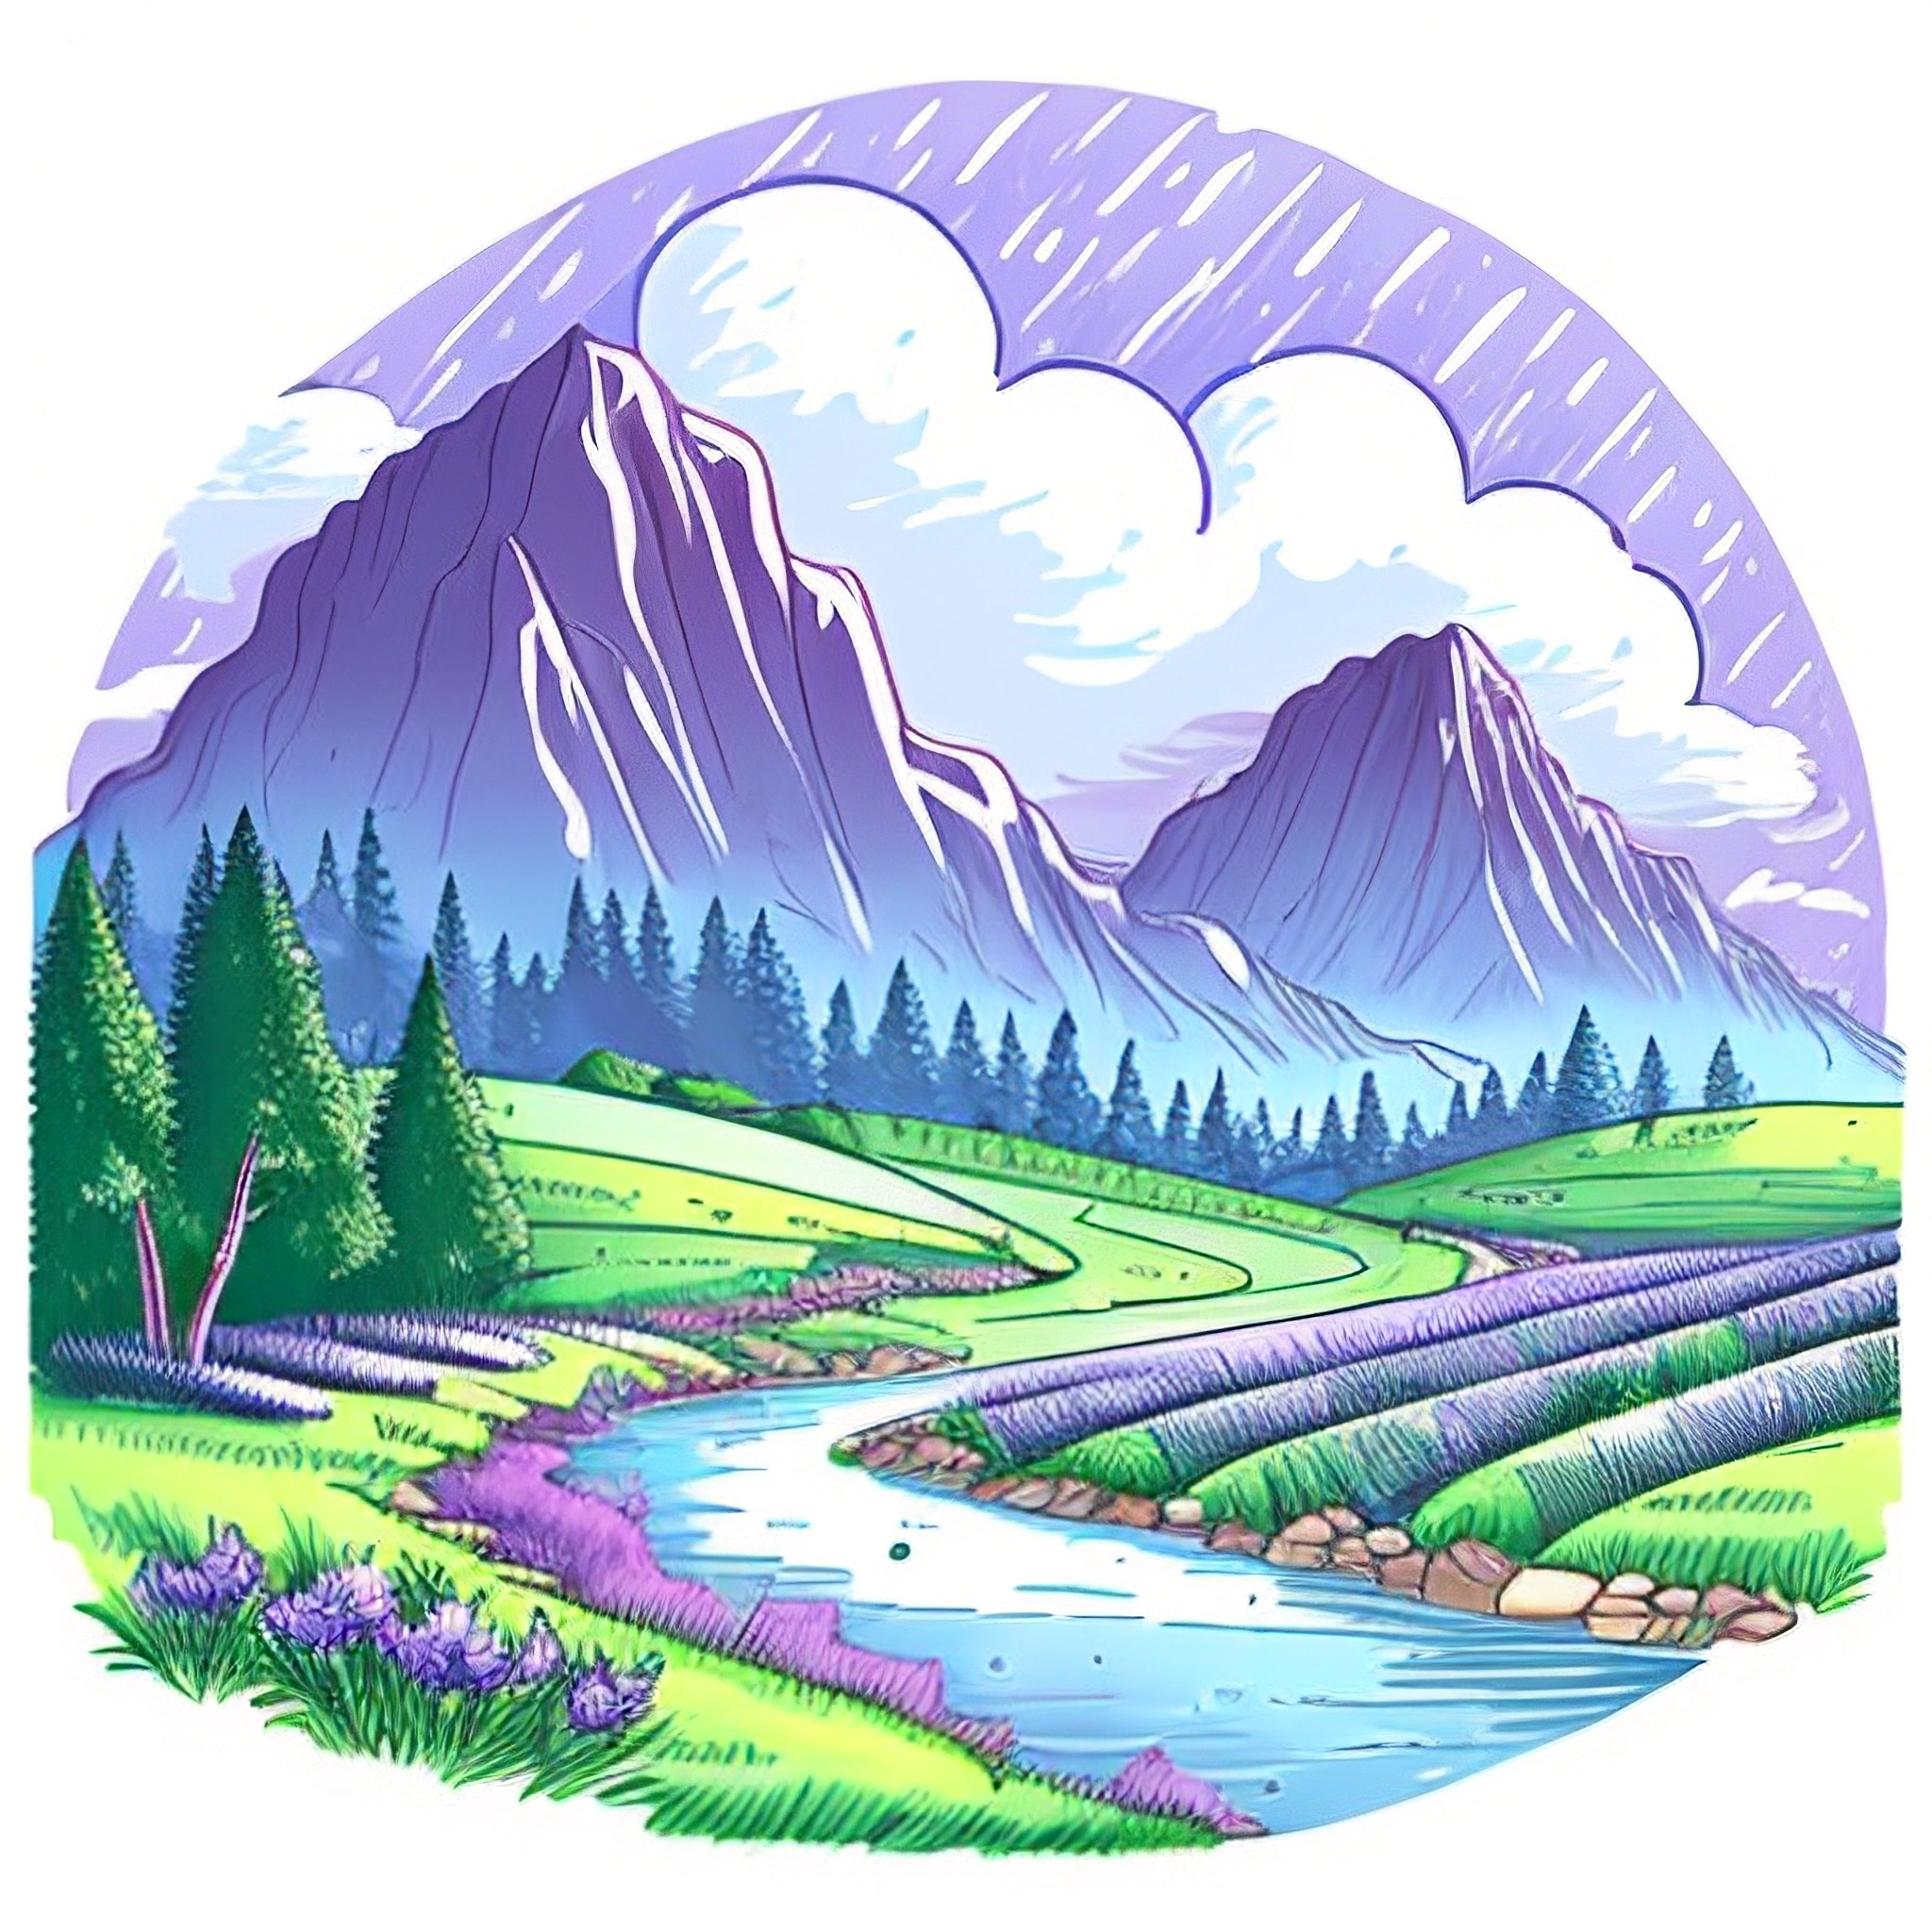 a drawing of a mountain landscape with a river and trees